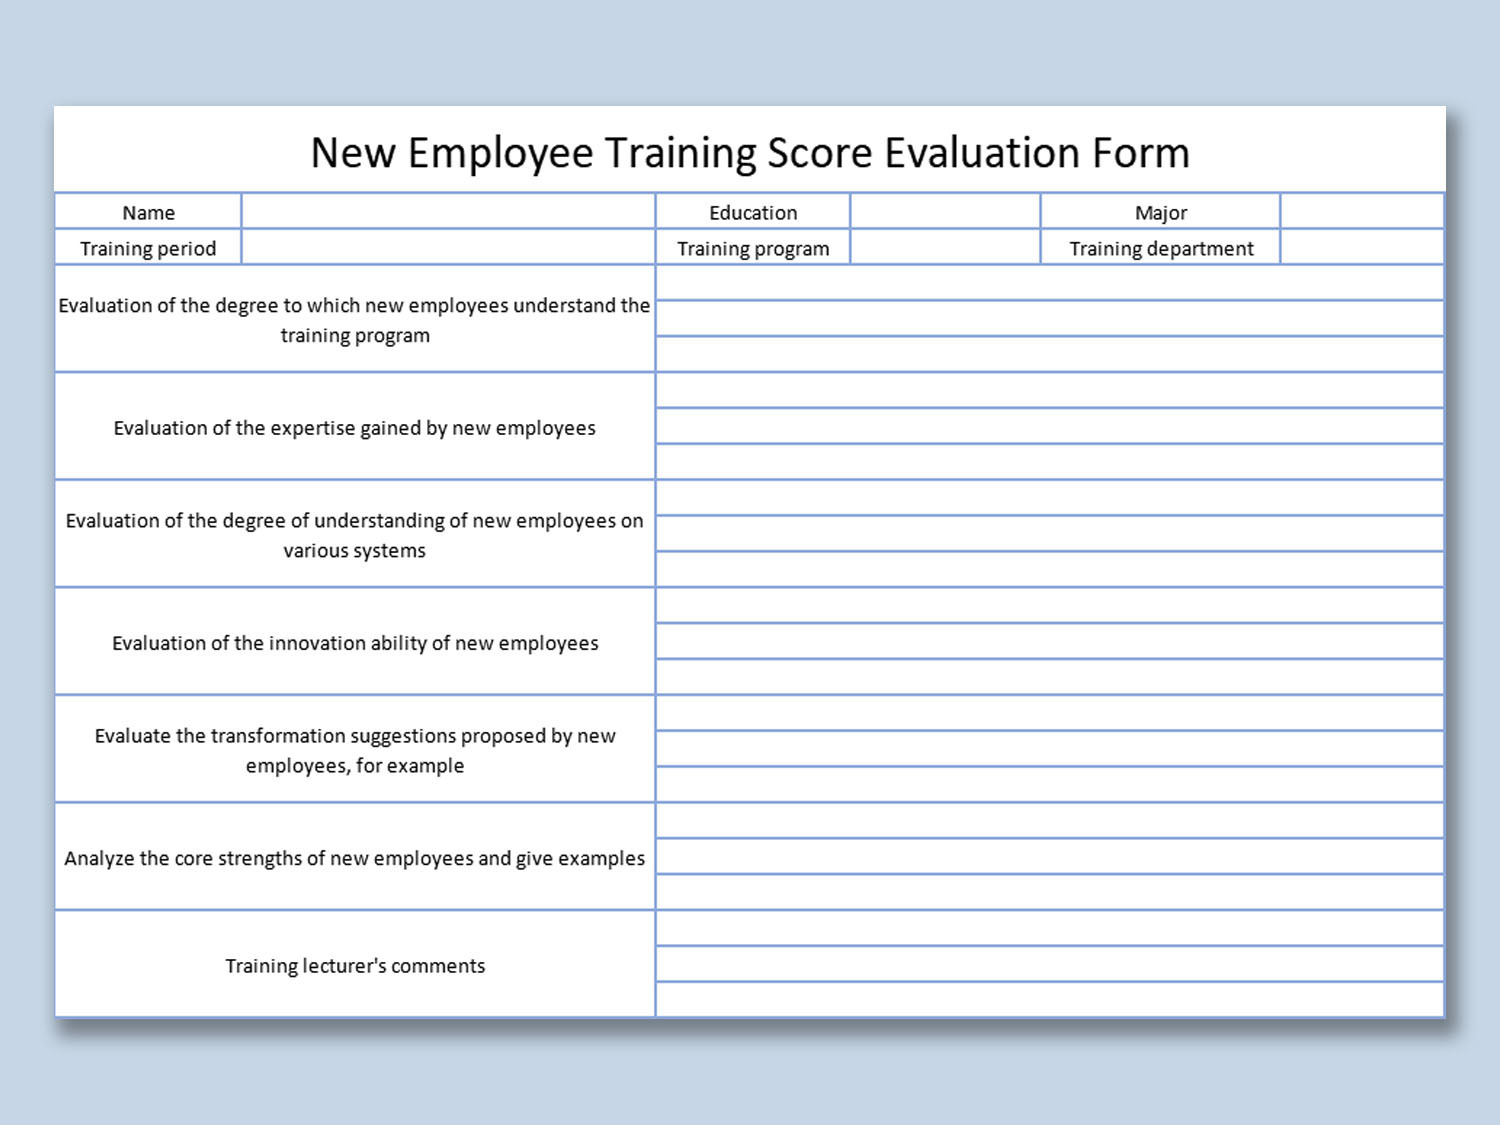 EXCEL of New Employee Training Score Evaluation Form